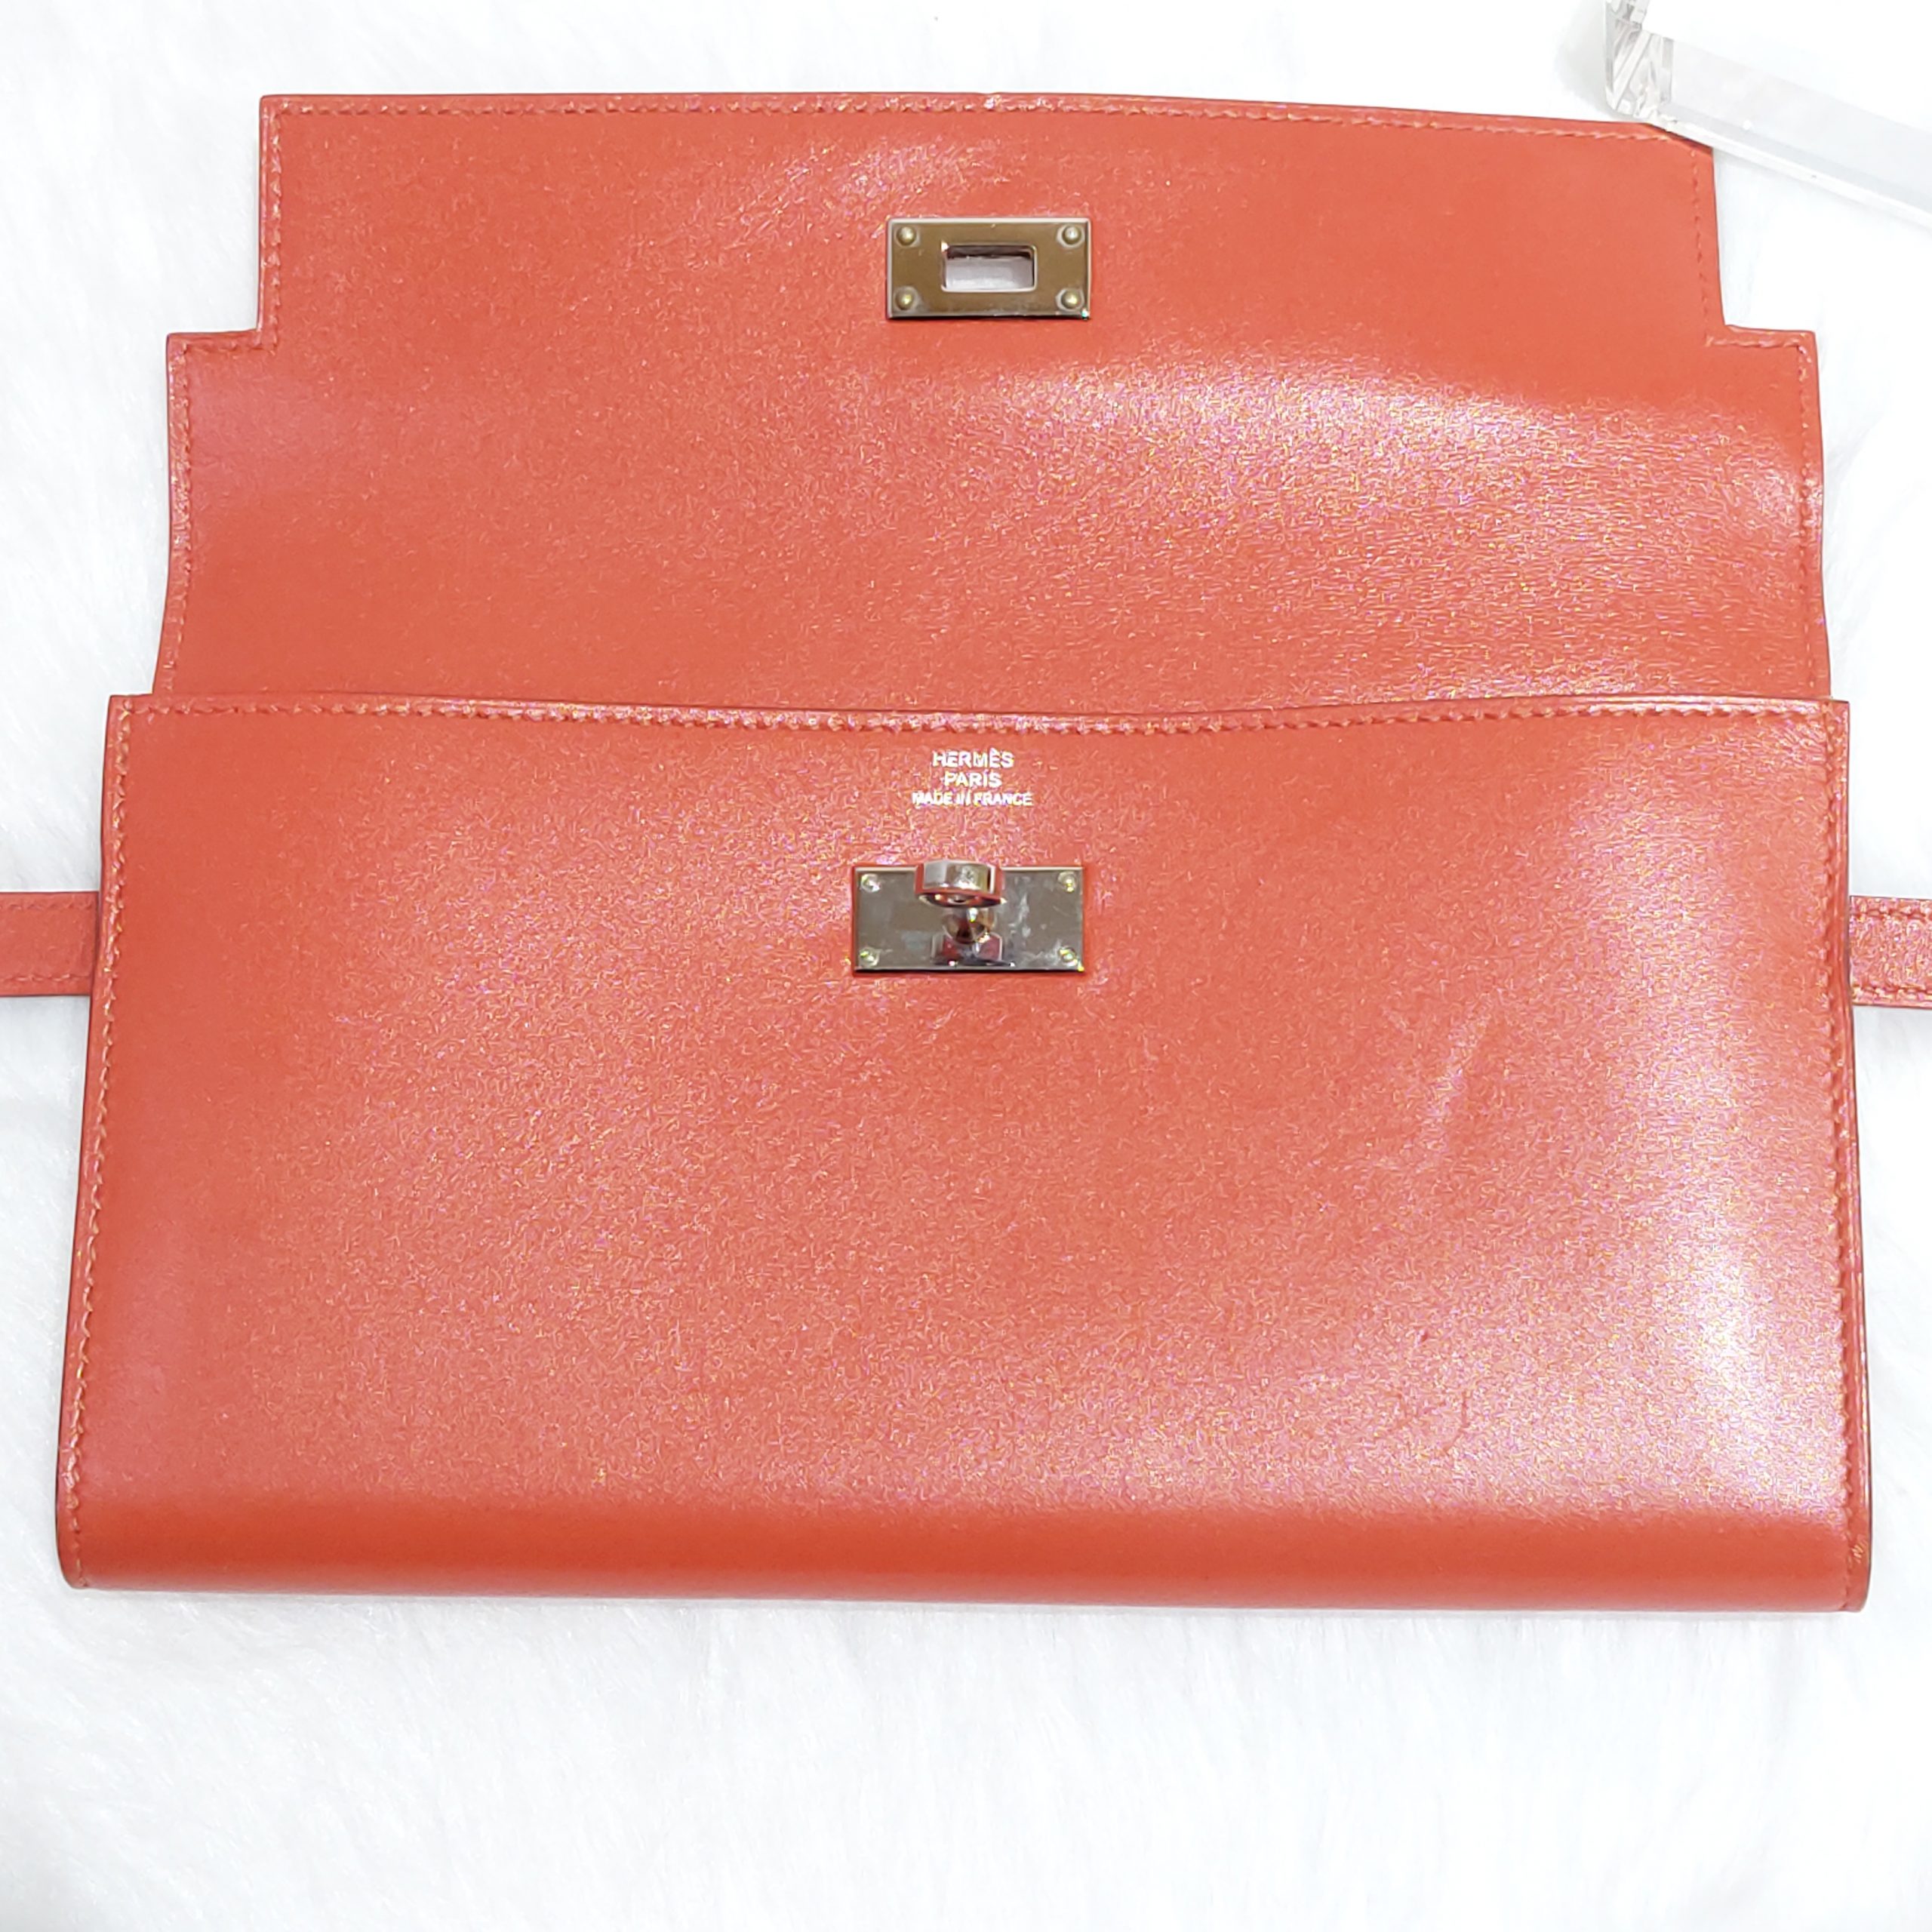 Hermes 2018 red packet envelope for trio kelly constance wallet petit h  charm